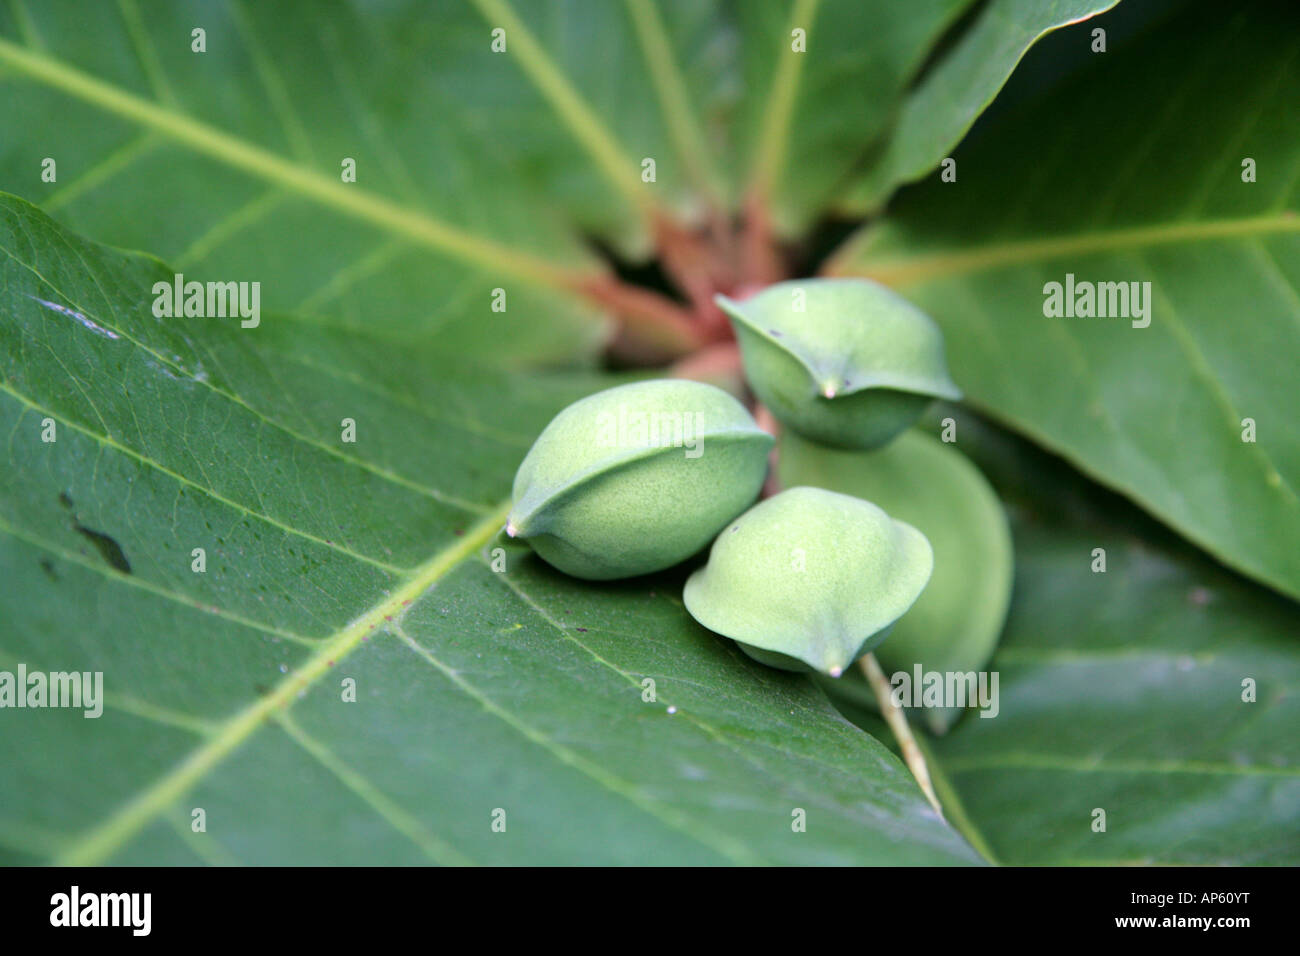 Green almonds on a tree Stock Photo